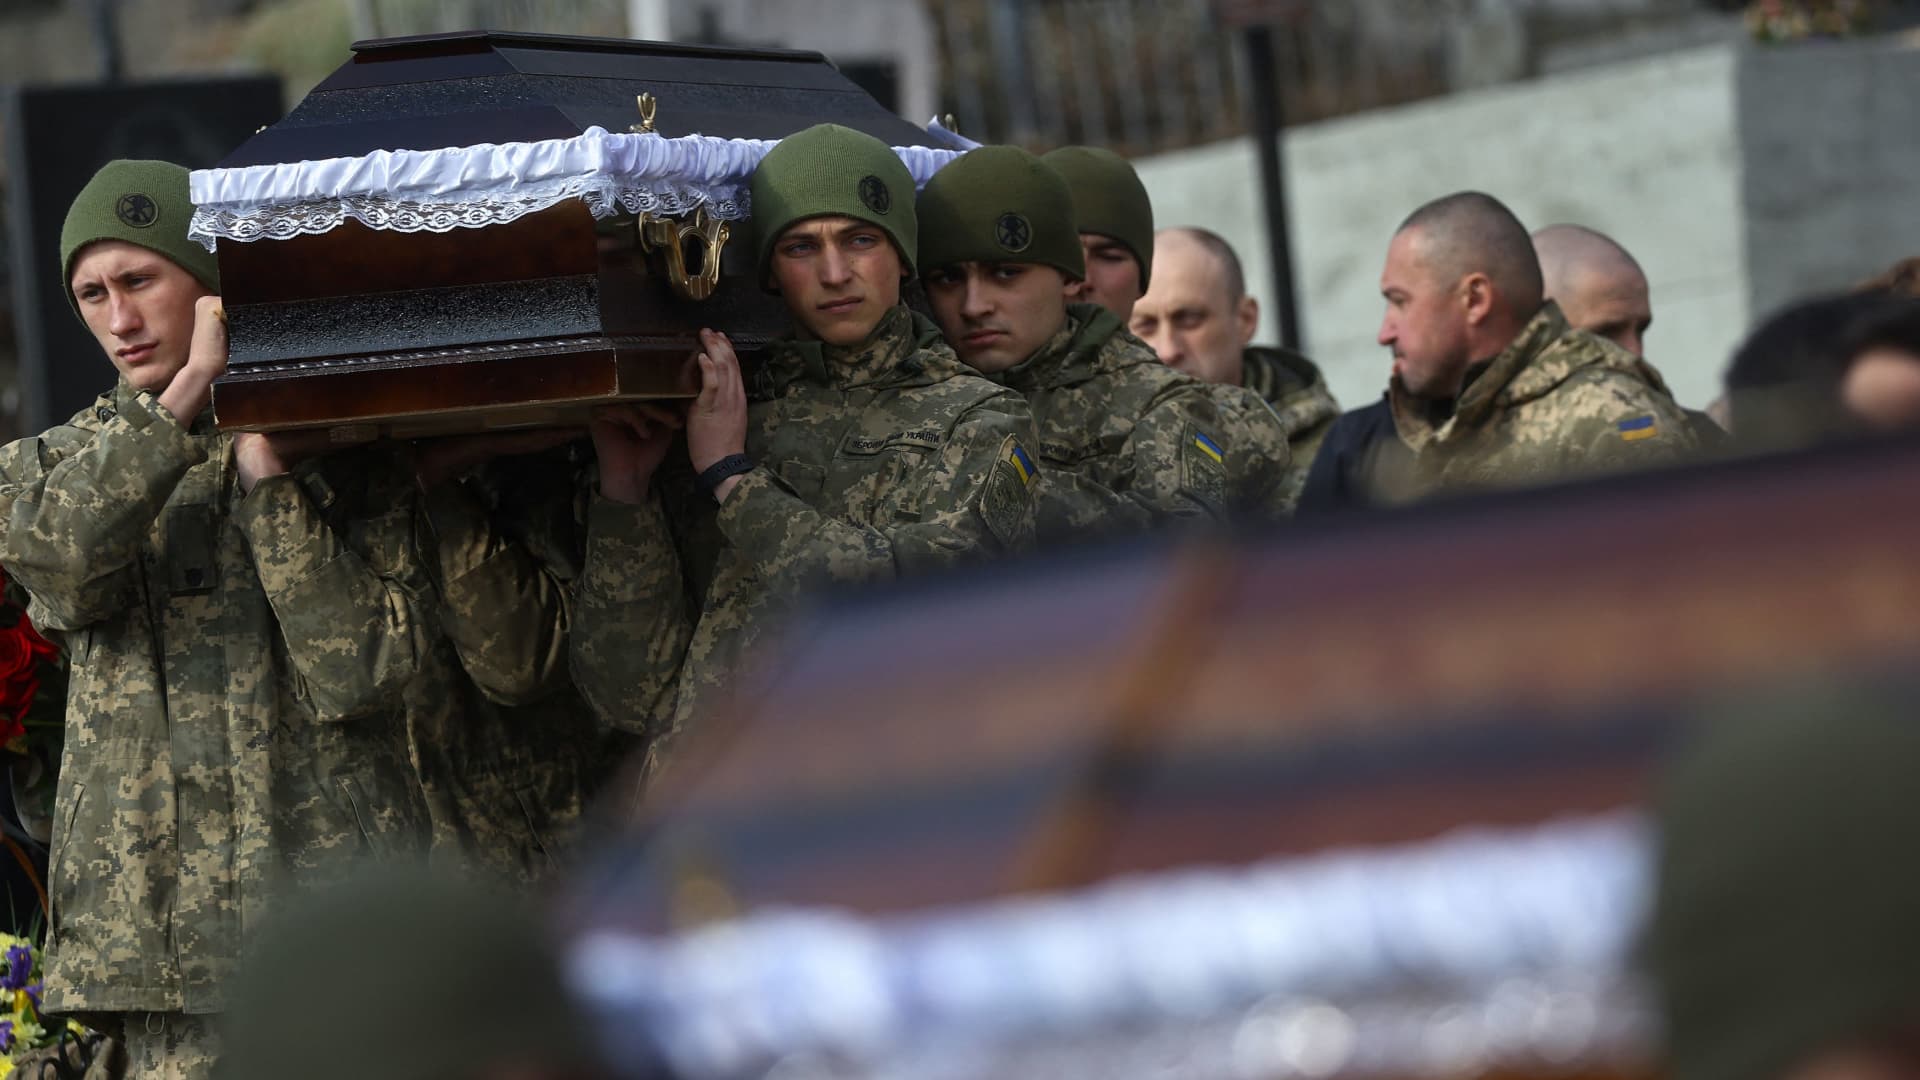 Servicemen hold coffins as relatives and friends mourn the death of four fallen Ukrainian servicemen, Oleg Vashchyshyn, Kyrylo Vyshyvanyi, Rostyslav Romanchuk and Serhiy Melnyk, who were killed in a rocket attack against a military base in Yavoriv during the ongoing Russian invasion, during a memorial and funeral service in Lviv, Ukraine, March 15, 2022. REUTERS/Kai Pfaffenbach